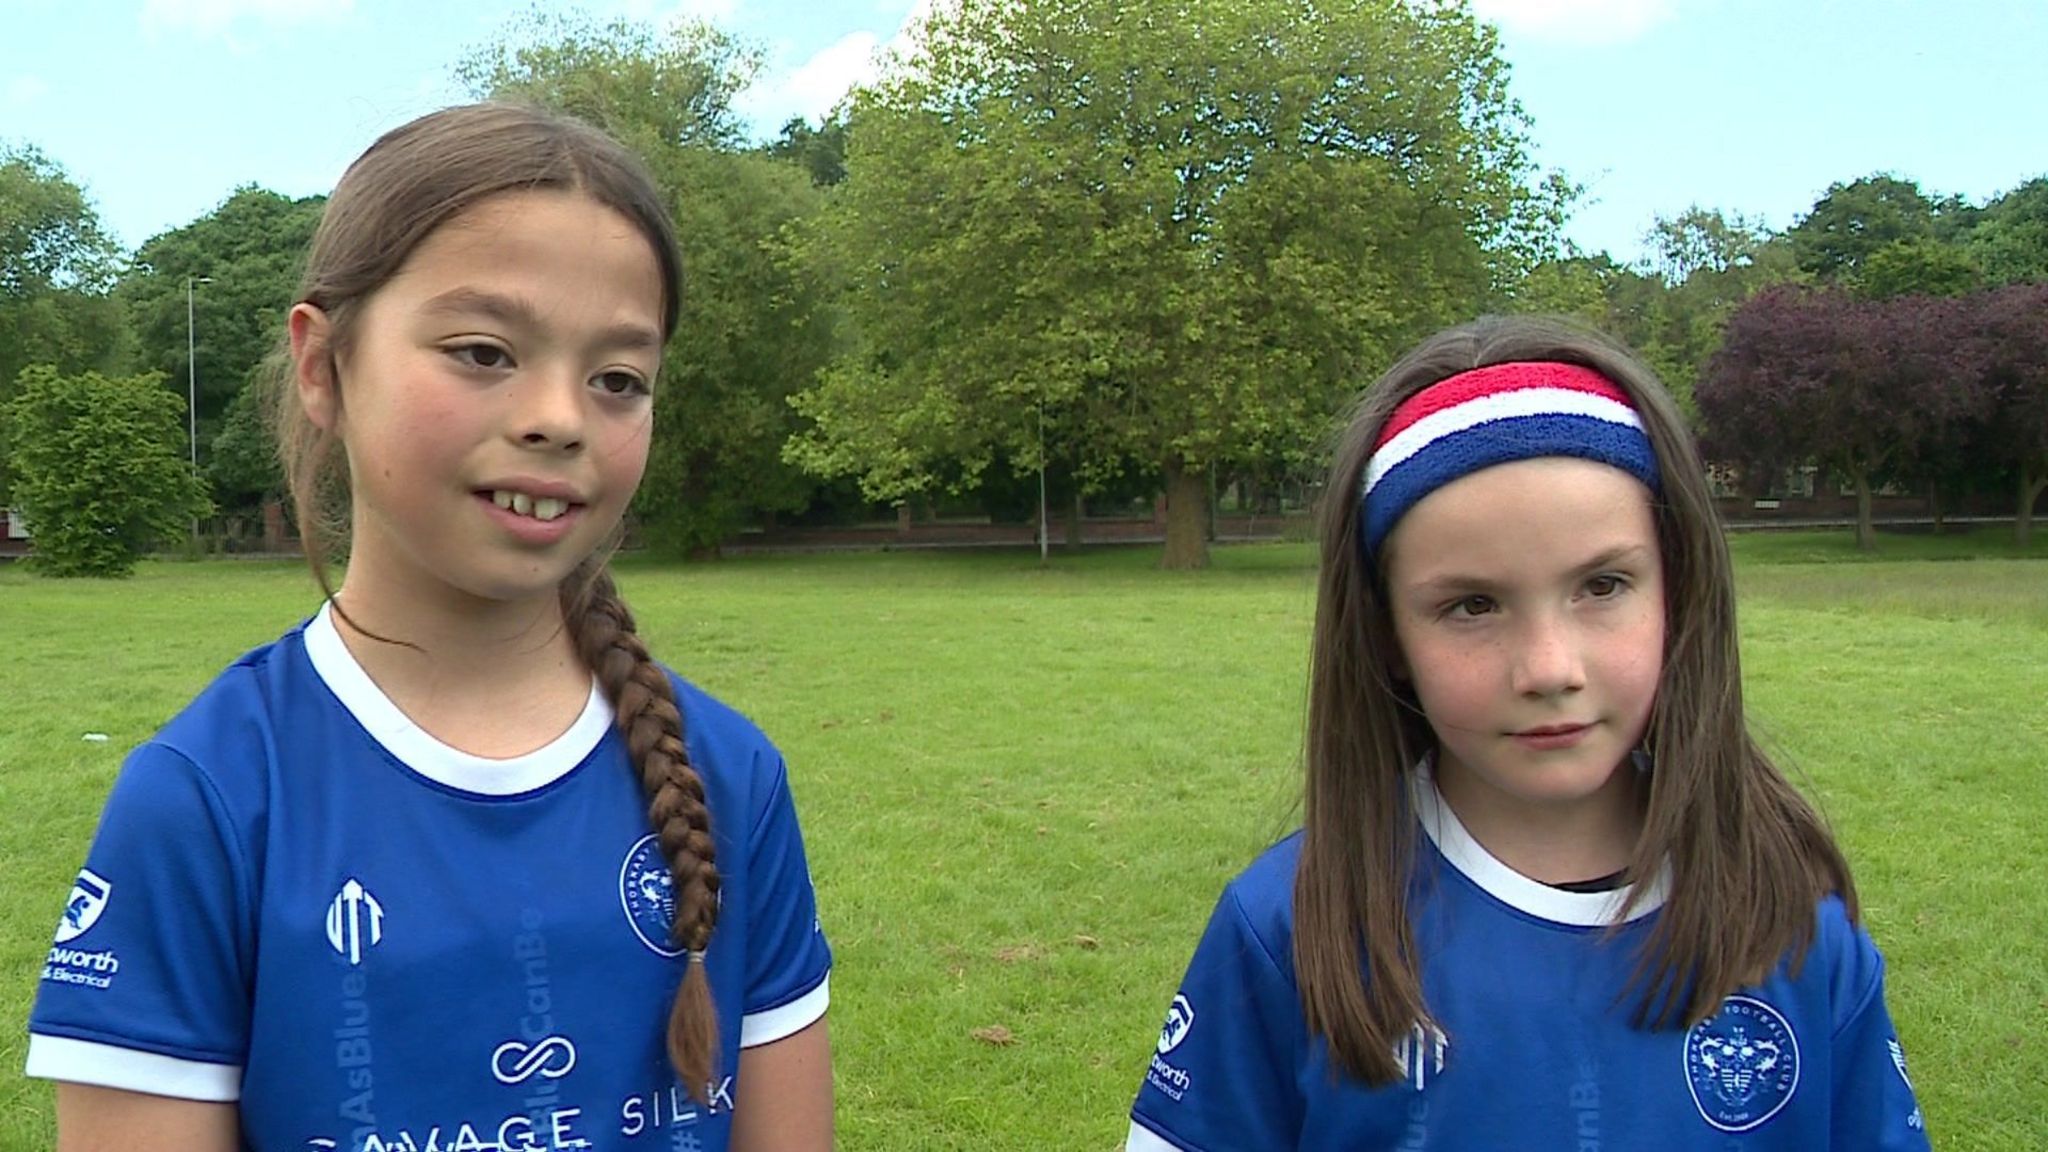 Isla (left) and Mia (right) being interviewed in their blue club shirts